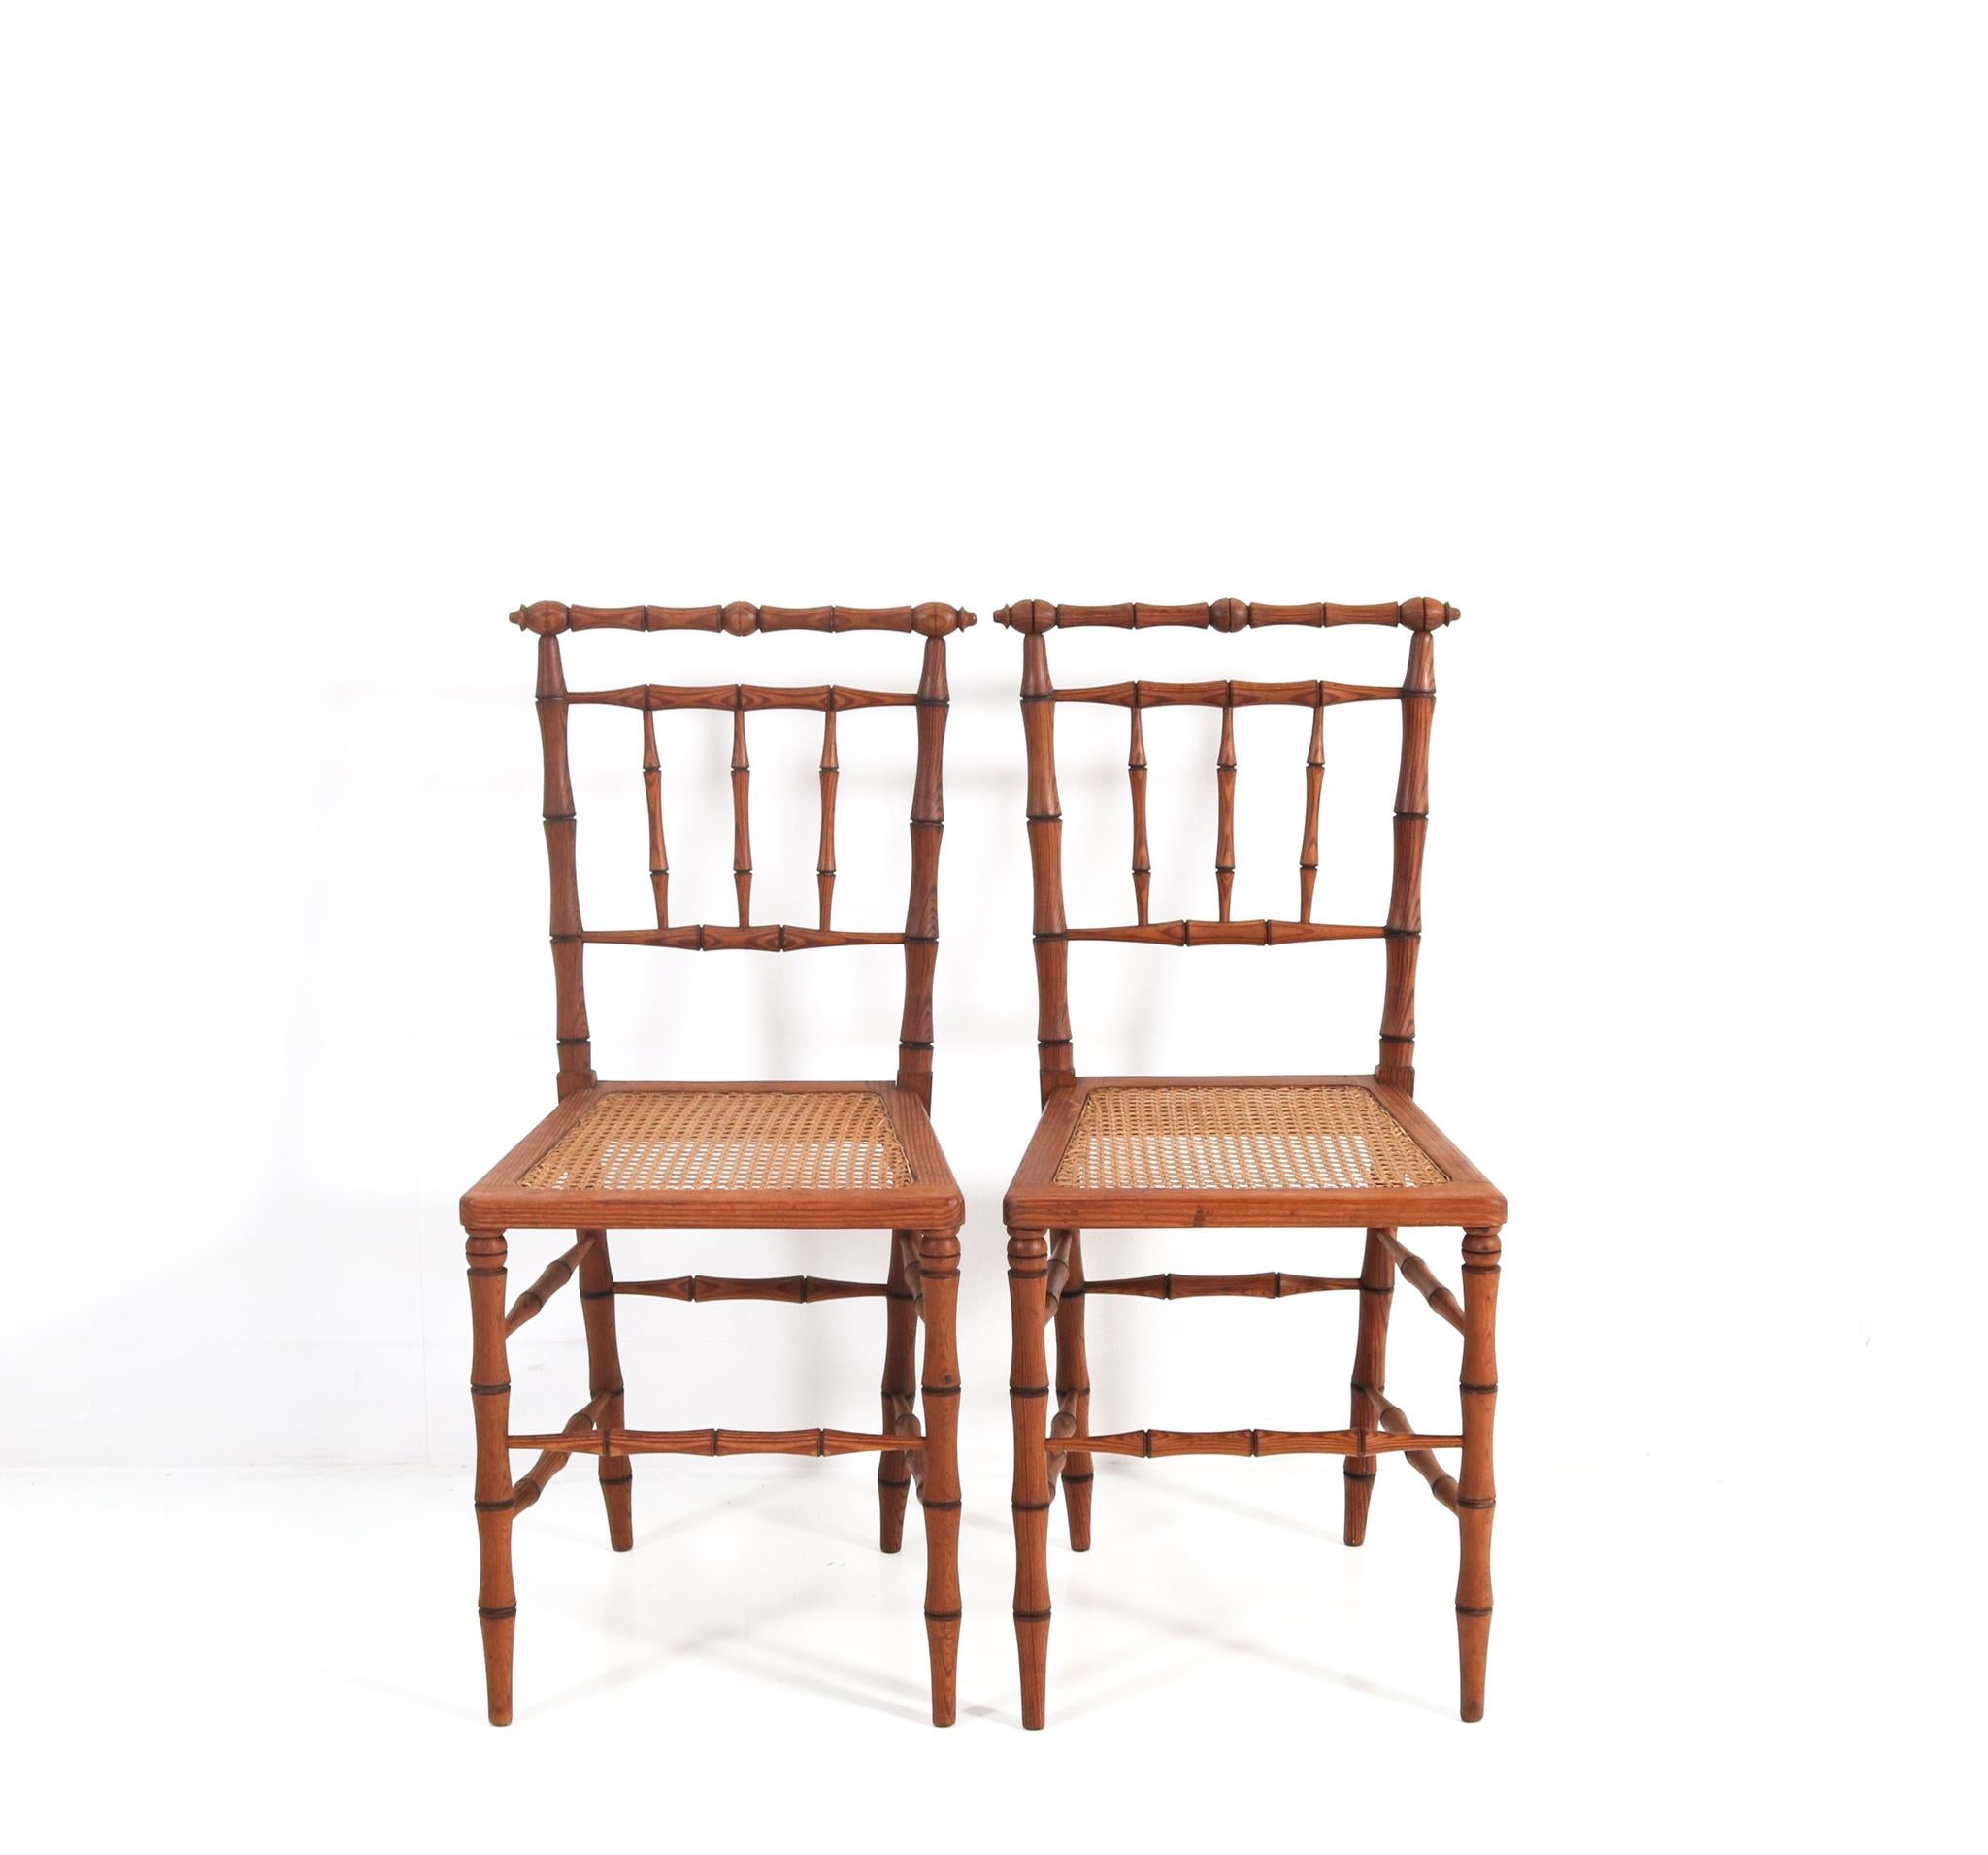 Magnificent and rare pair of Art Nouveau side chairs.
Striking French design from the 1900s.
Solid pitch-pine frames in the Faux Bamboo style with original.
Wicker seats.
Rare because of the fact that this wonderful pair of Faux Bamboo side